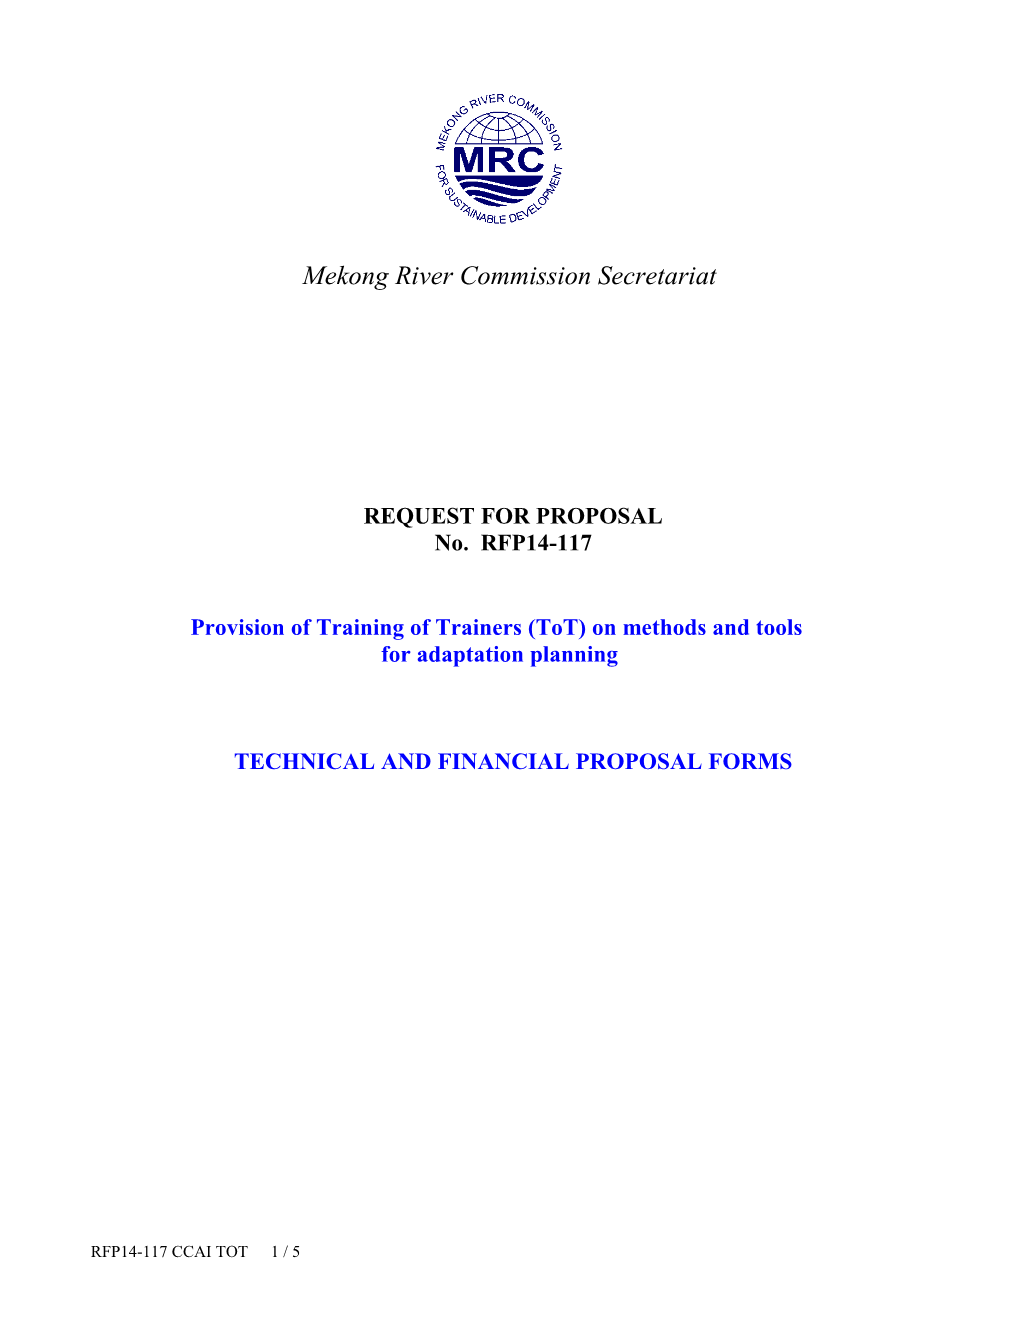 Provision of Training of Trainers (Tot) on Methods and Tools